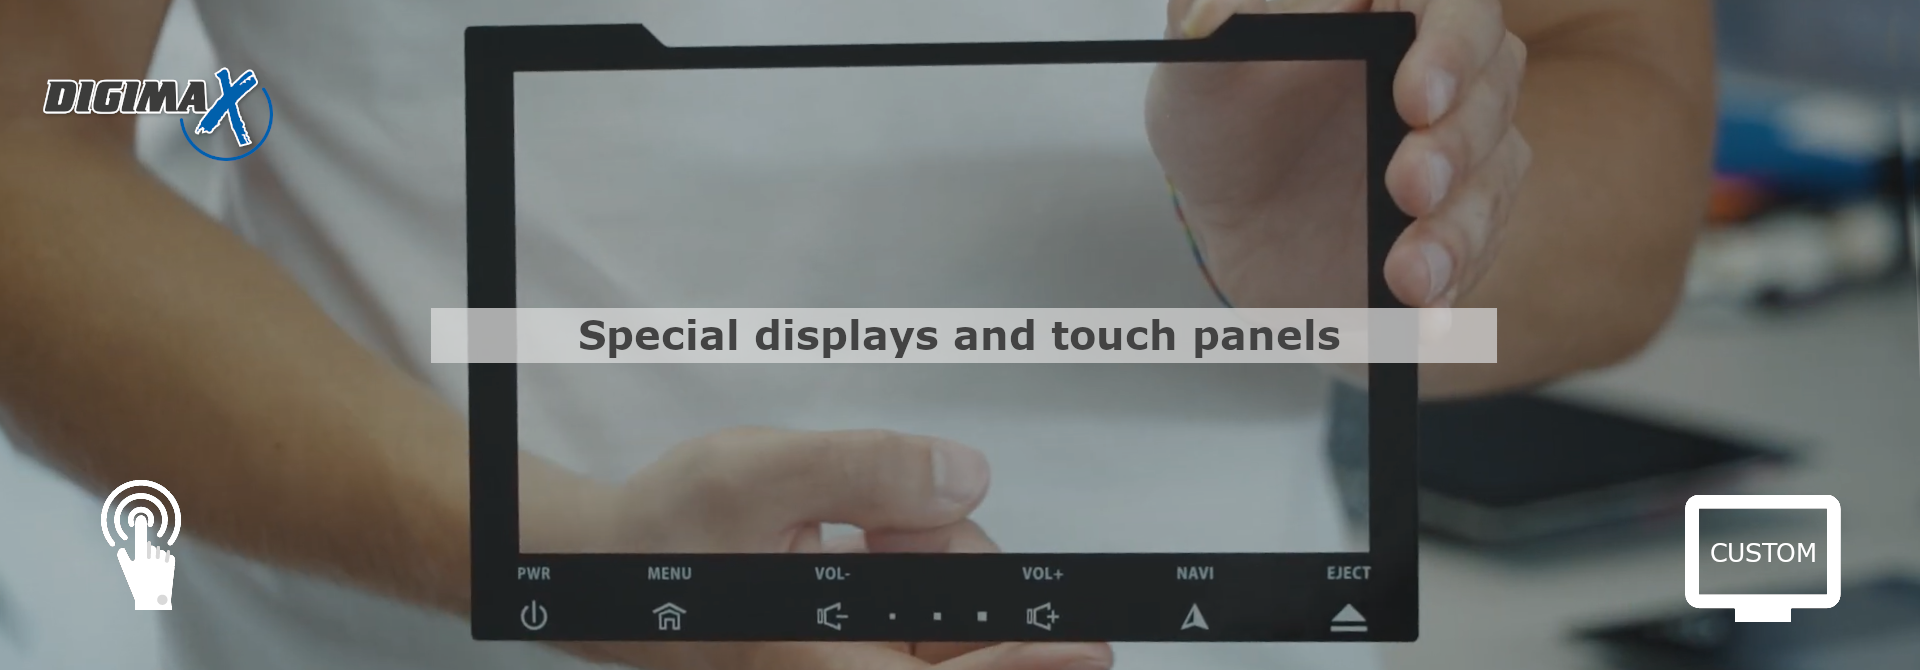 Special displays and touch panels for industrial applications